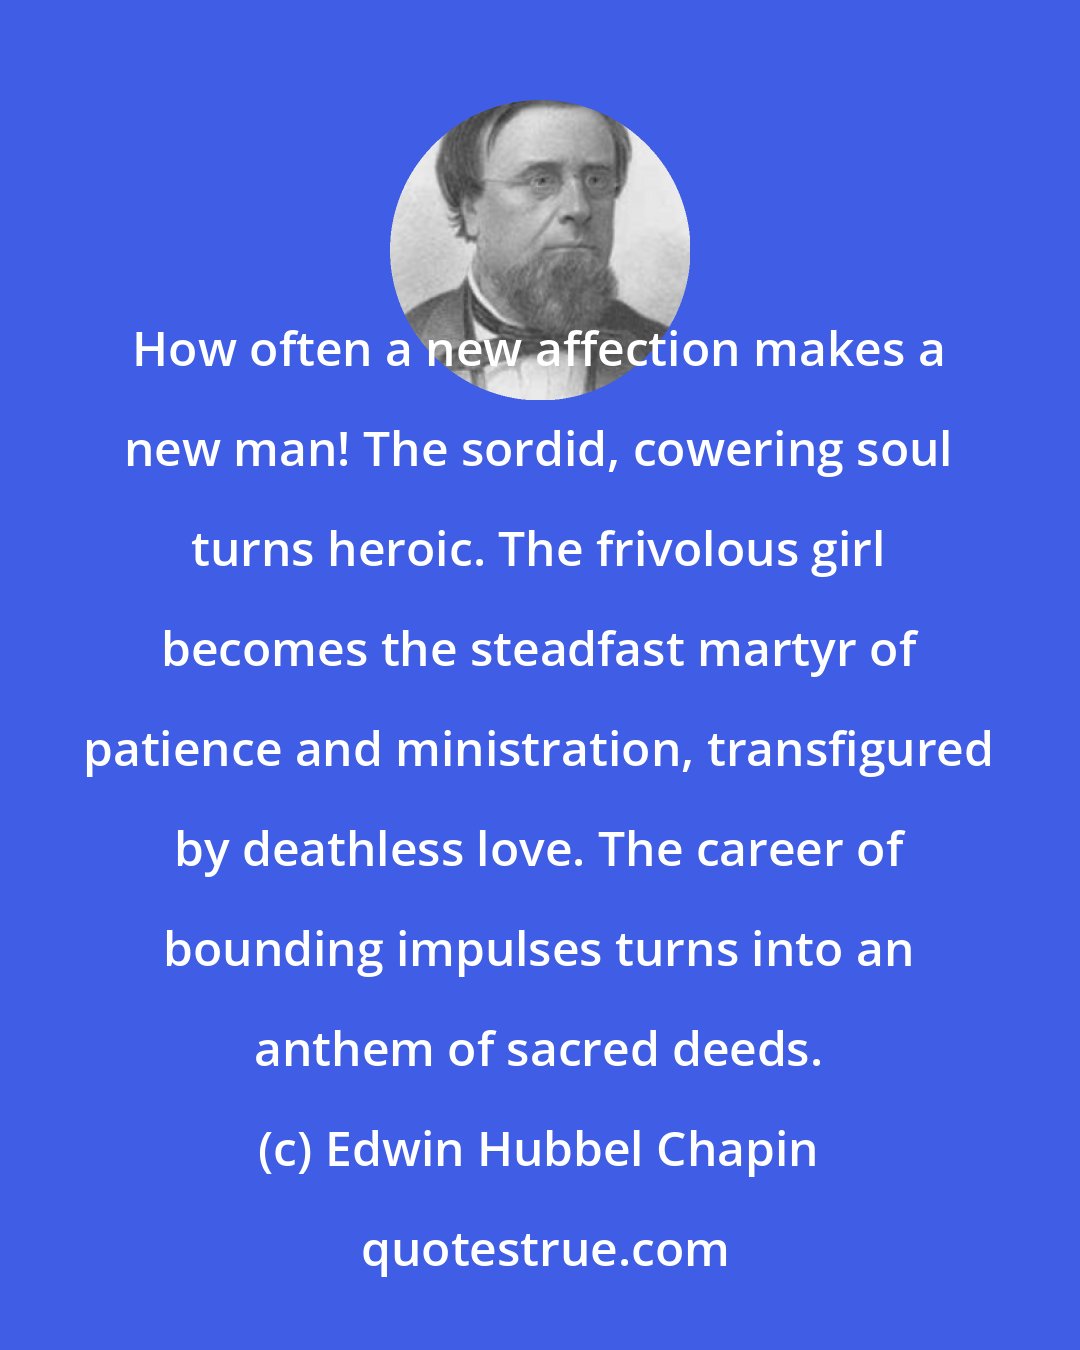 Edwin Hubbel Chapin: How often a new affection makes a new man! The sordid, cowering soul turns heroic. The frivolous girl becomes the steadfast martyr of patience and ministration, transfigured by deathless love. The career of bounding impulses turns into an anthem of sacred deeds.